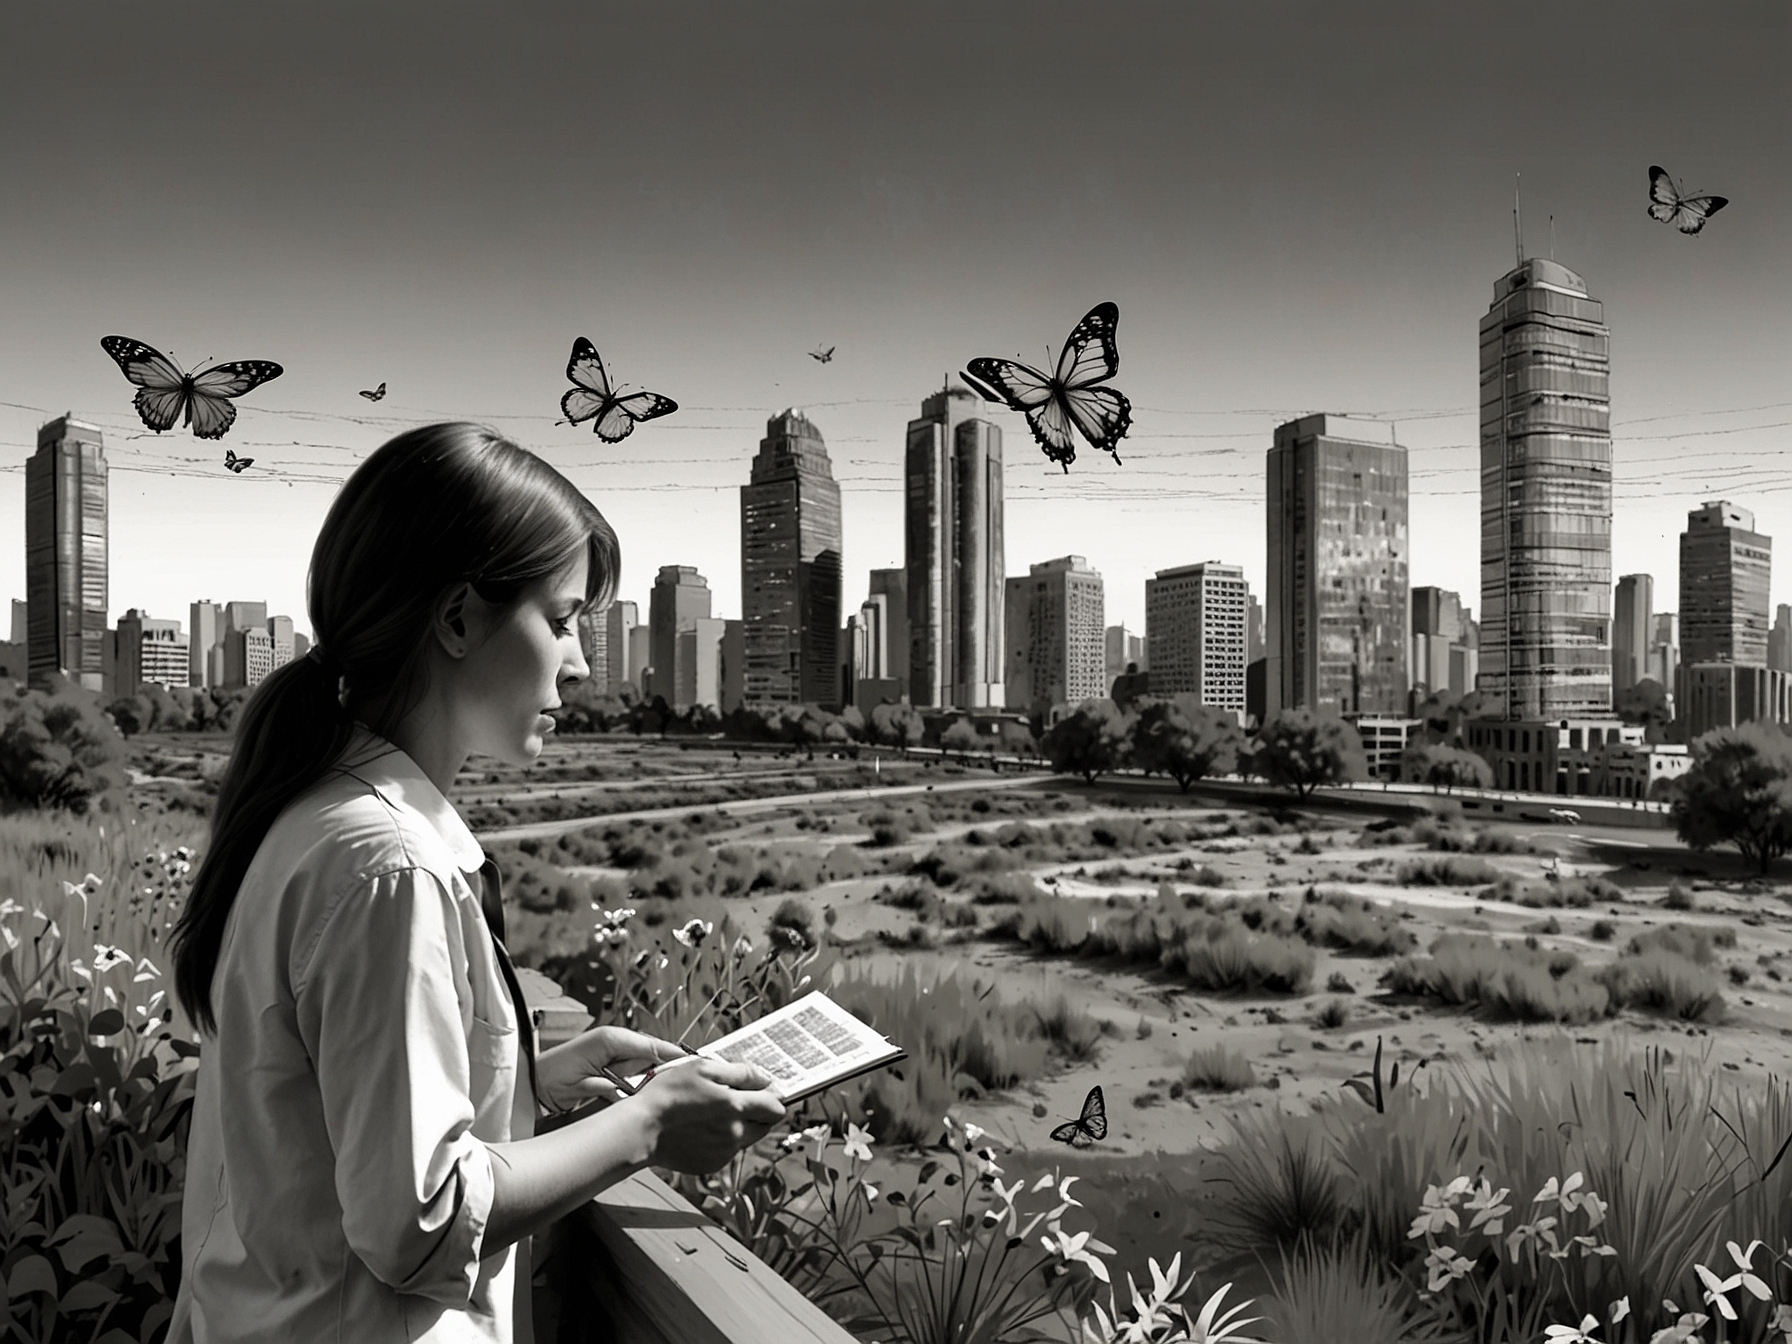 An ecologist studies the diminishing butterfly habitats, surrounded by urban development and deforested areas, illustrating the impact of habitat loss on butterfly populations.